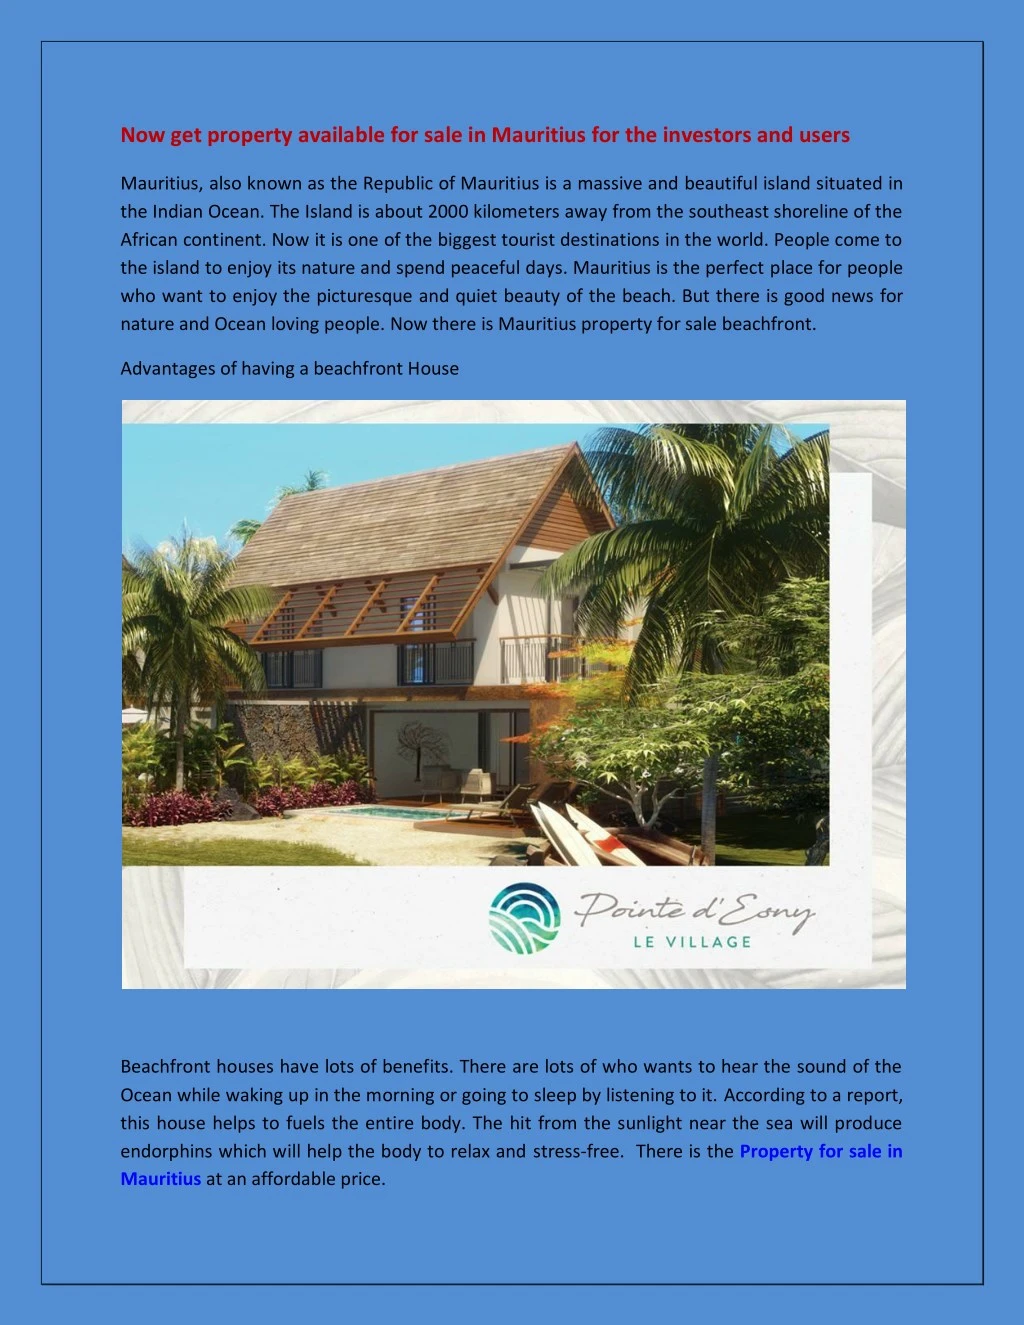 now get property available for sale in mauritius